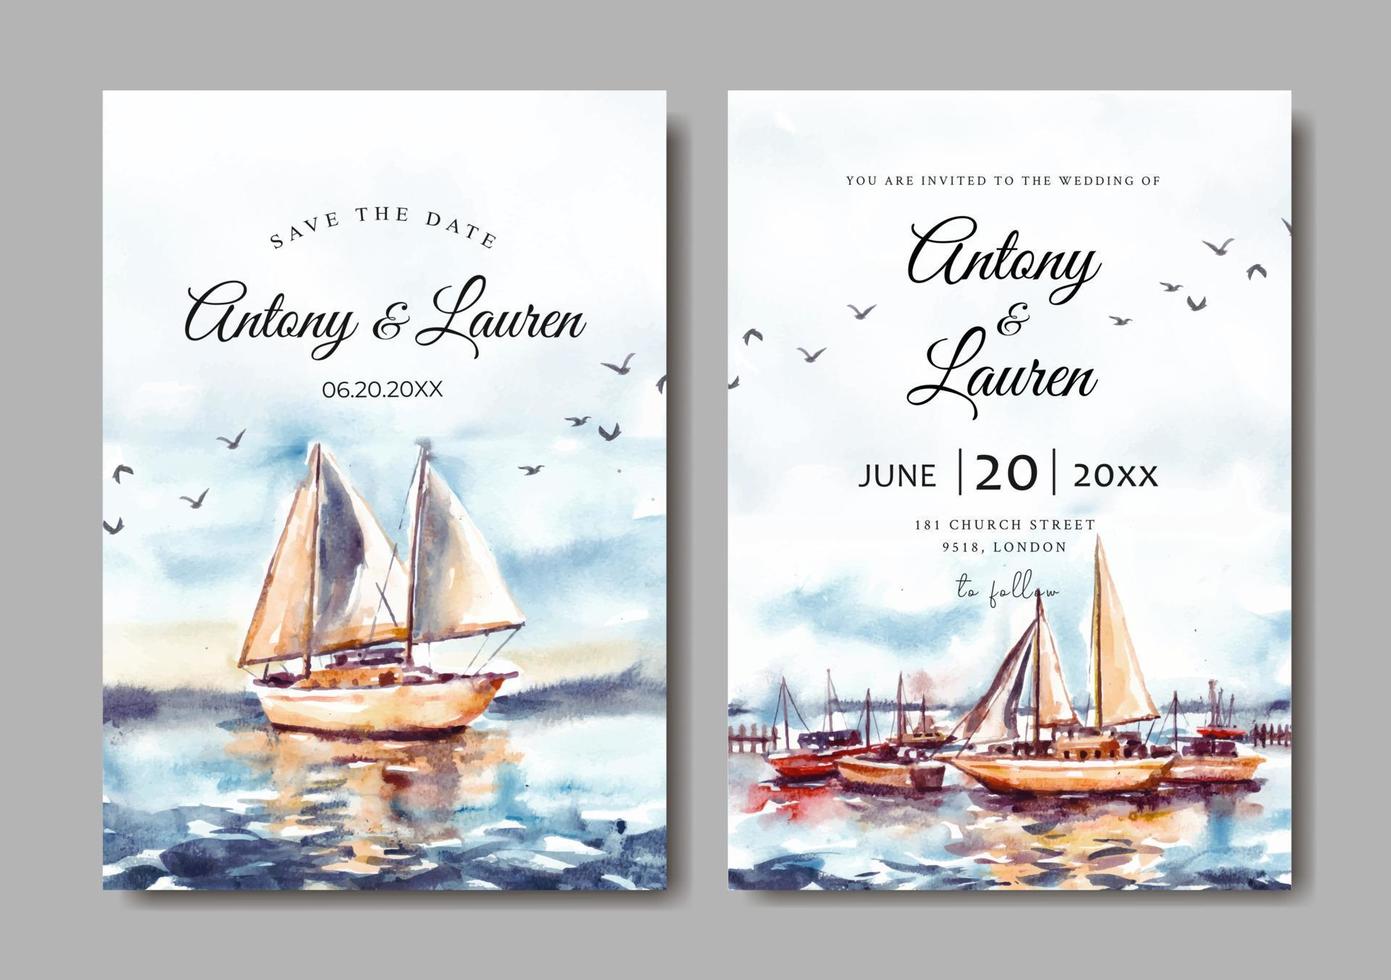 Wedding invitation of sunrise landscape with harbor and boat watercolor vector